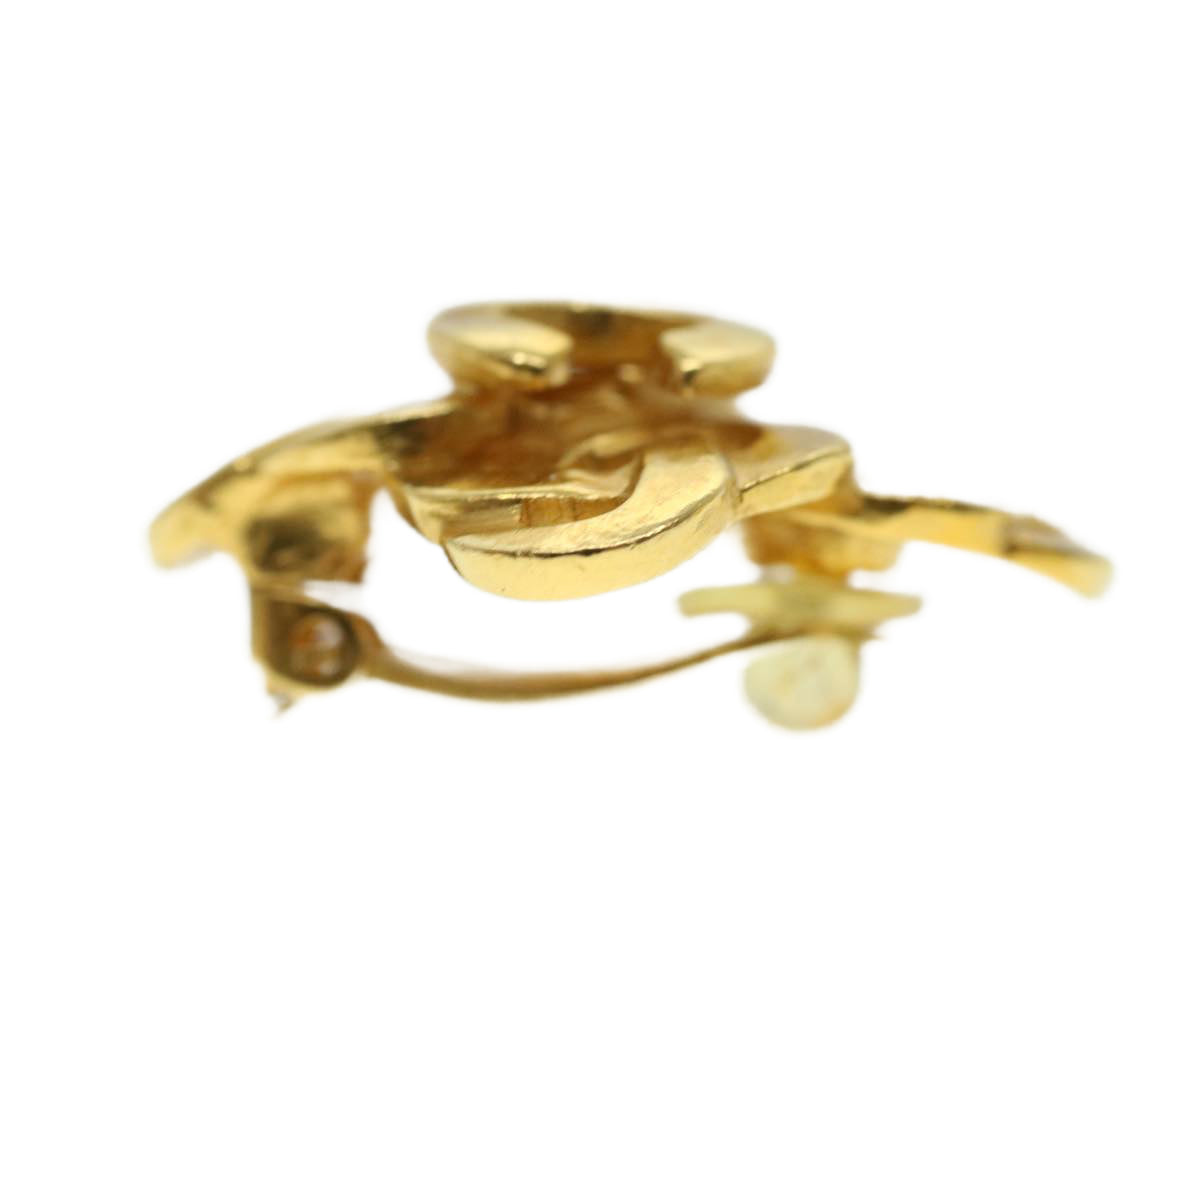 CHANEL Earring Gold Tone CC Auth 41255